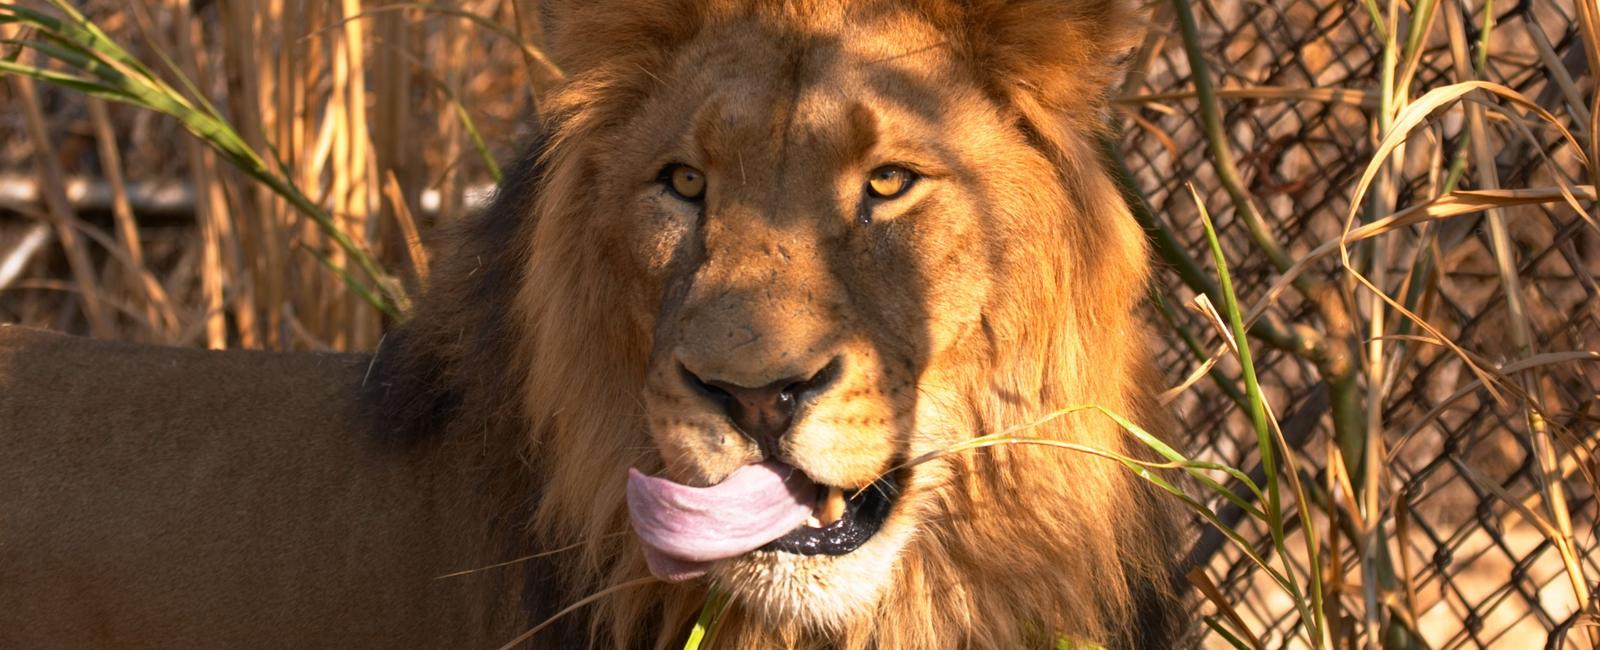 A male lion can eat up to 43 kg per day